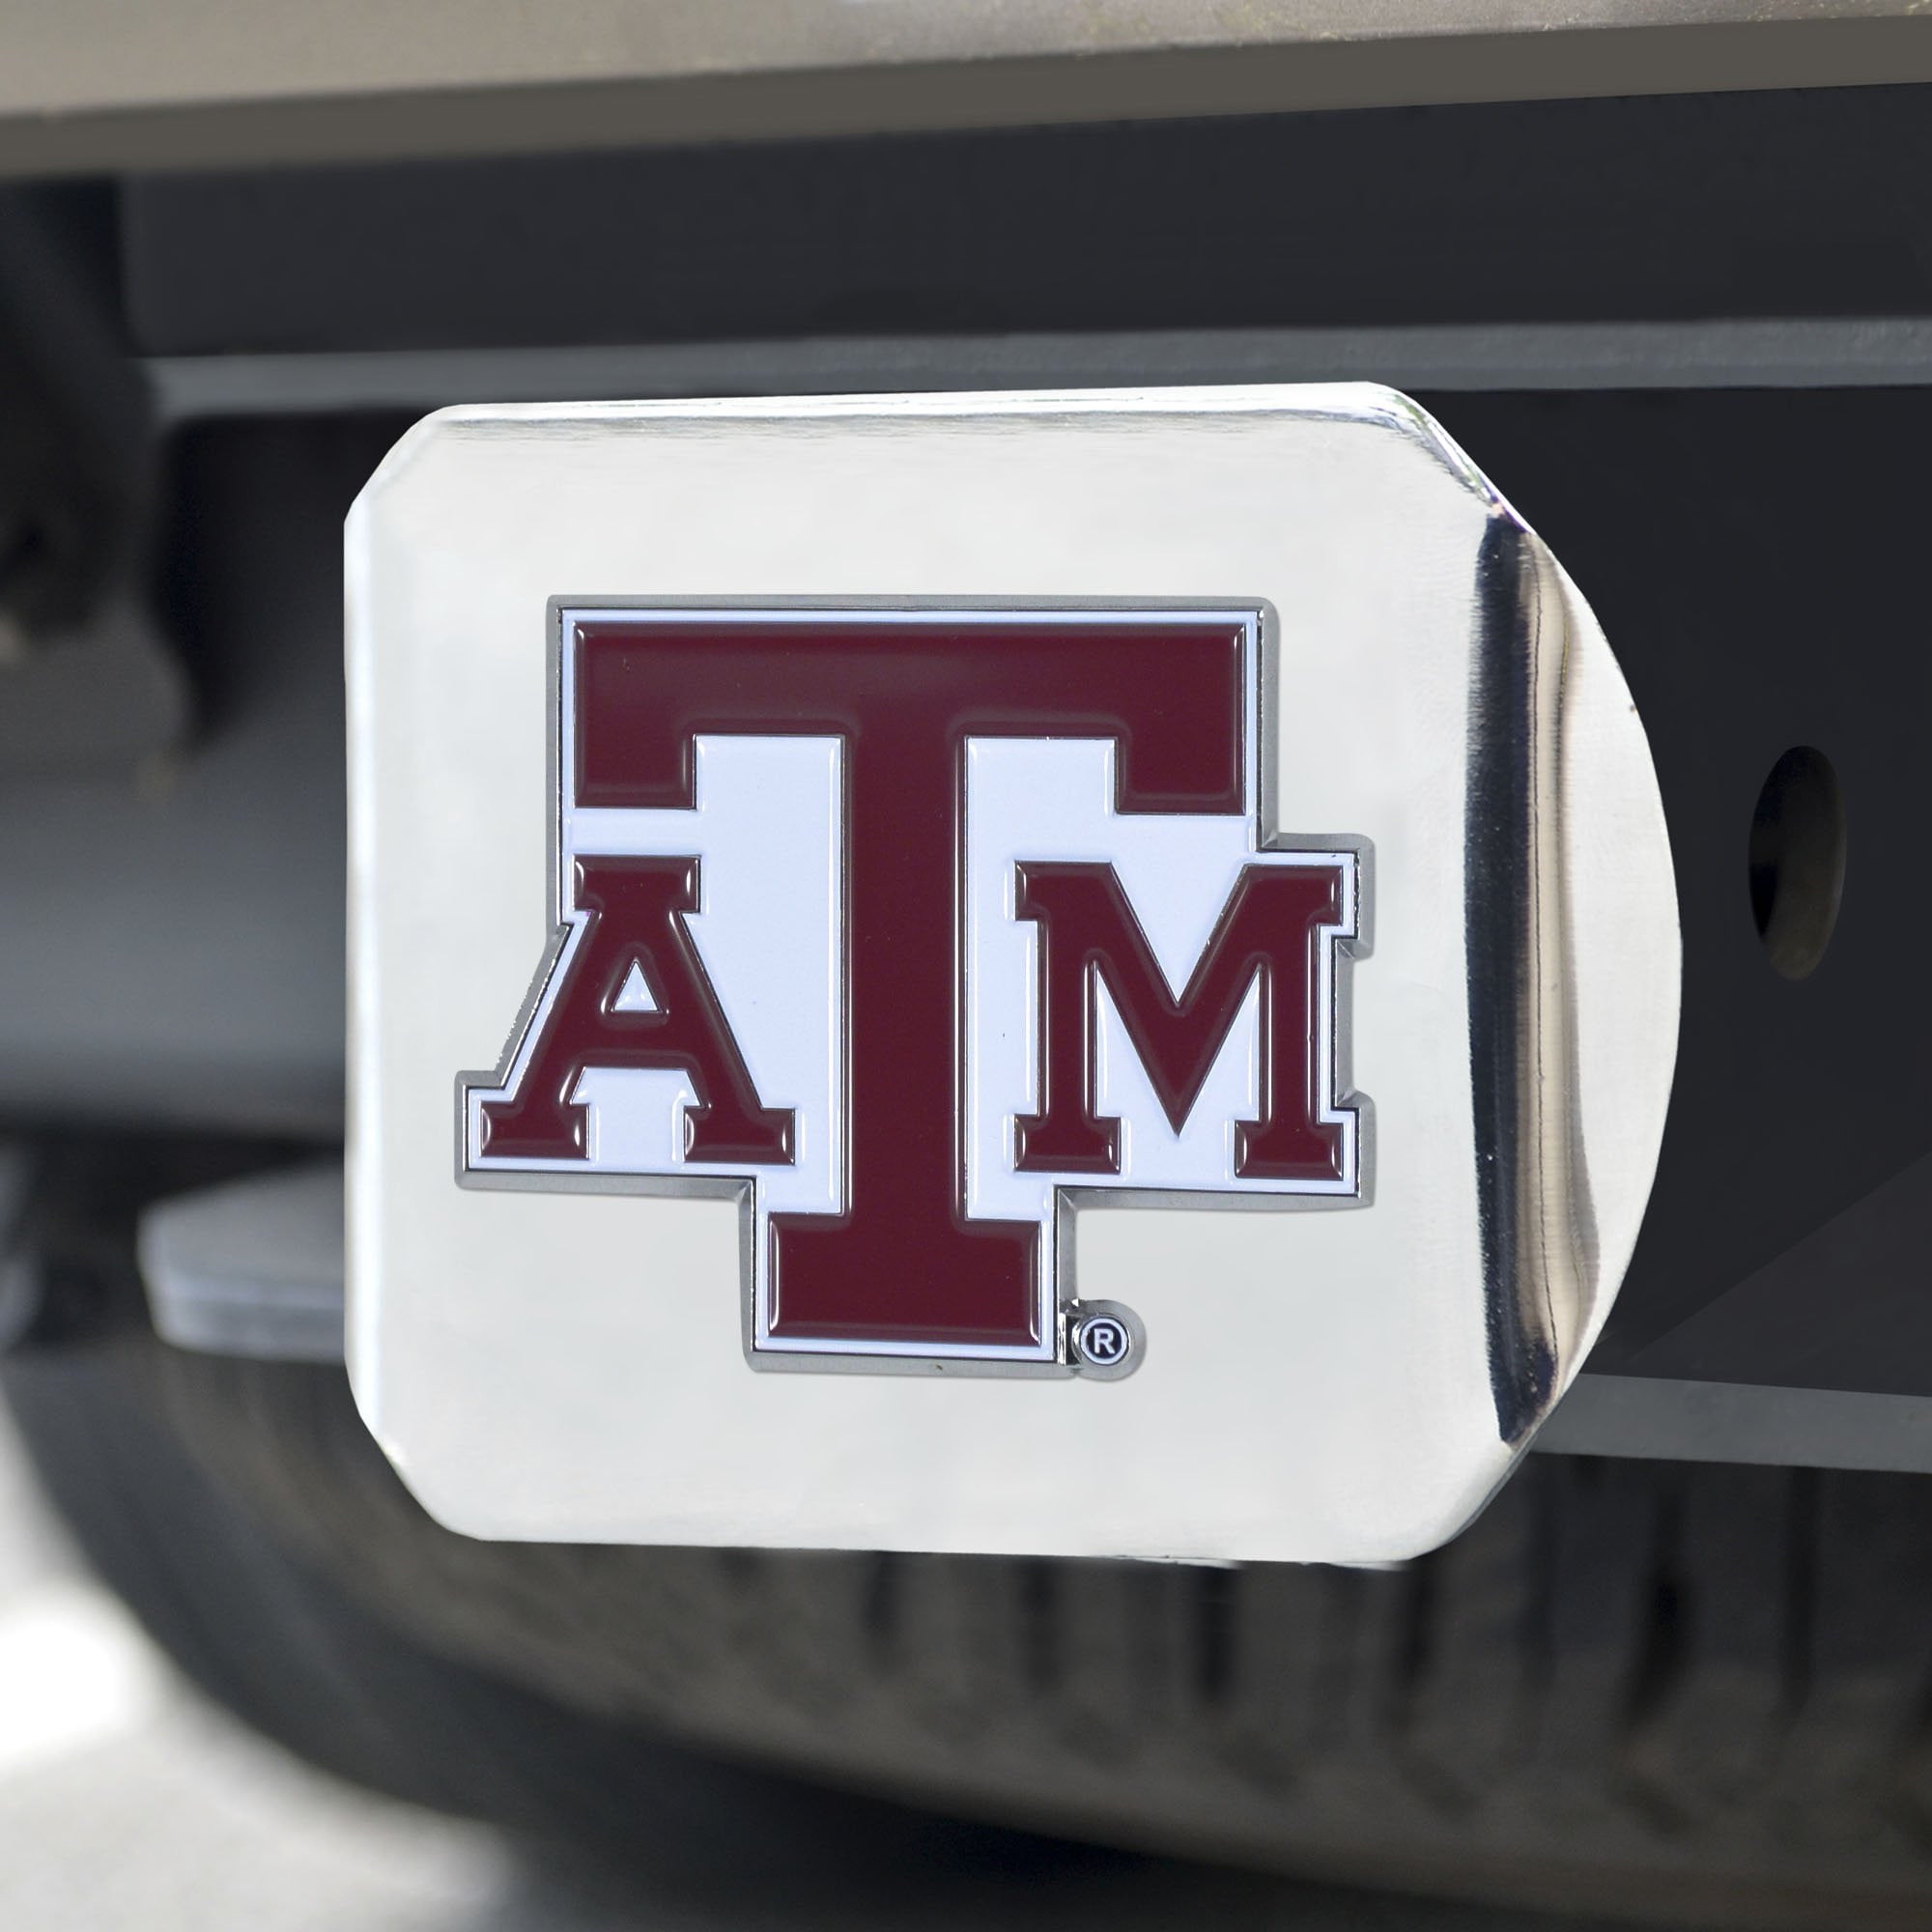 Texas A&M Aggies Color Hitch Cover 3.4